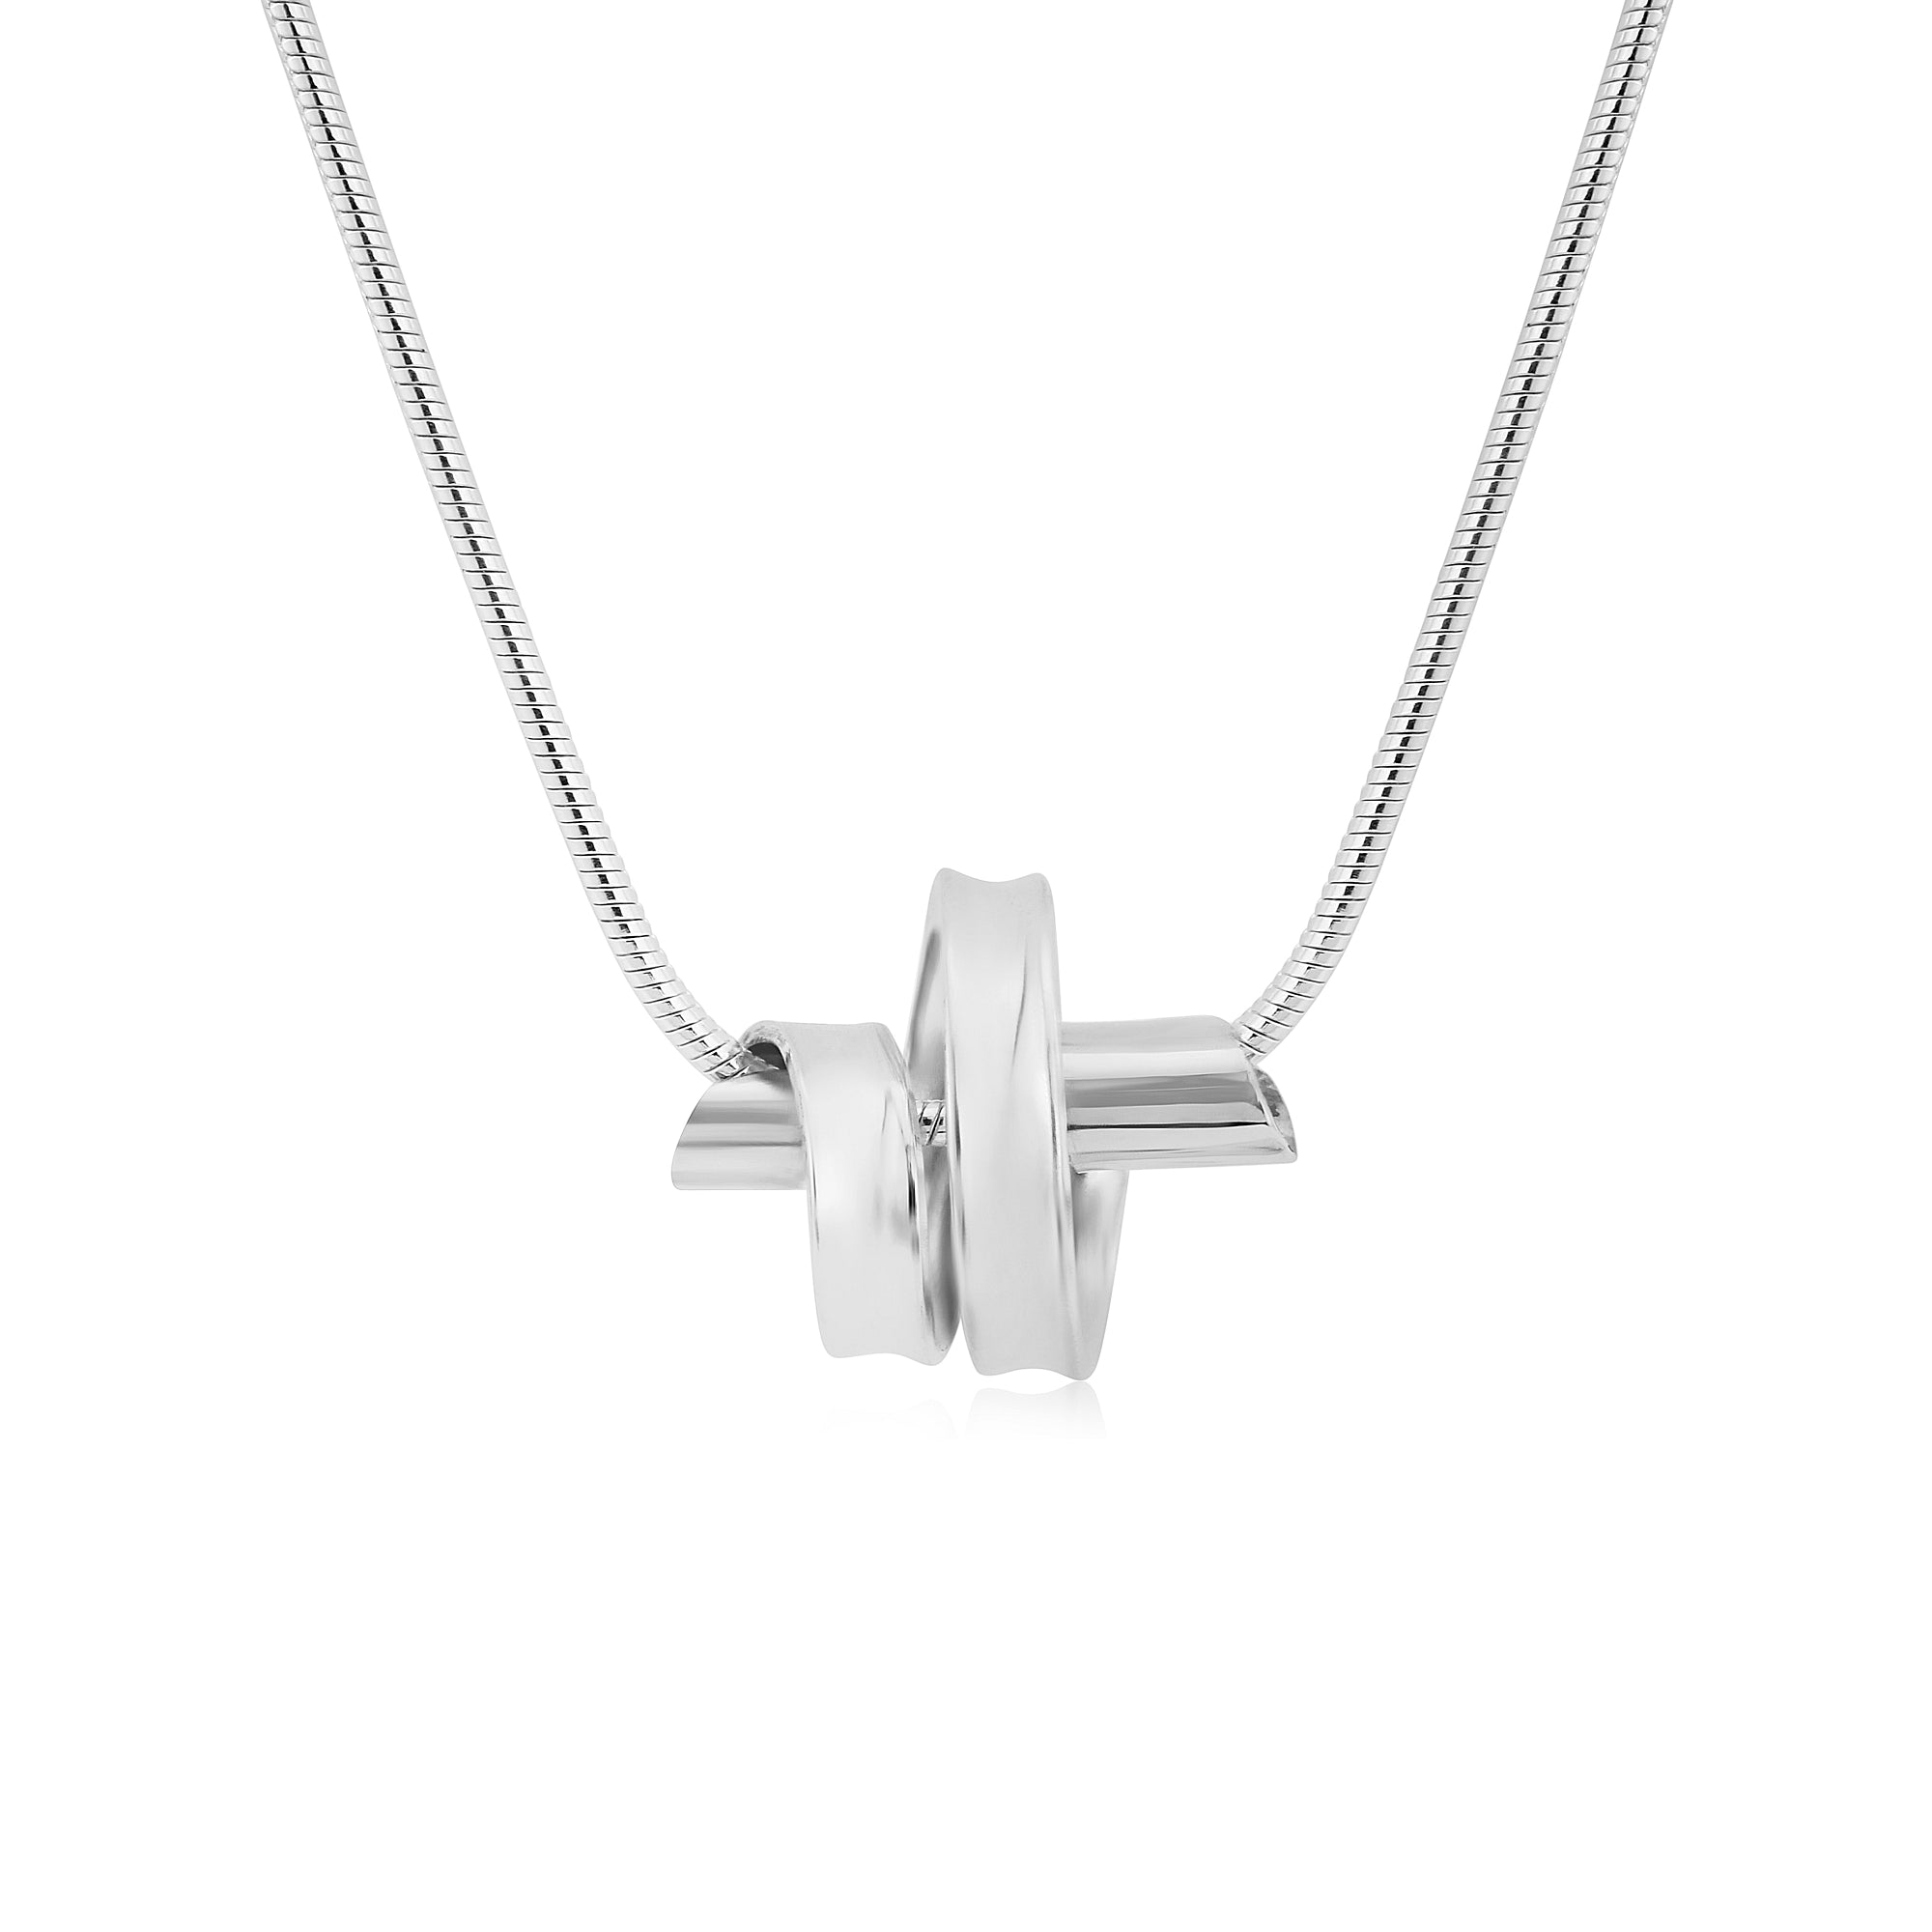 Hand-formed Sterling Silver Ribbon Pendant